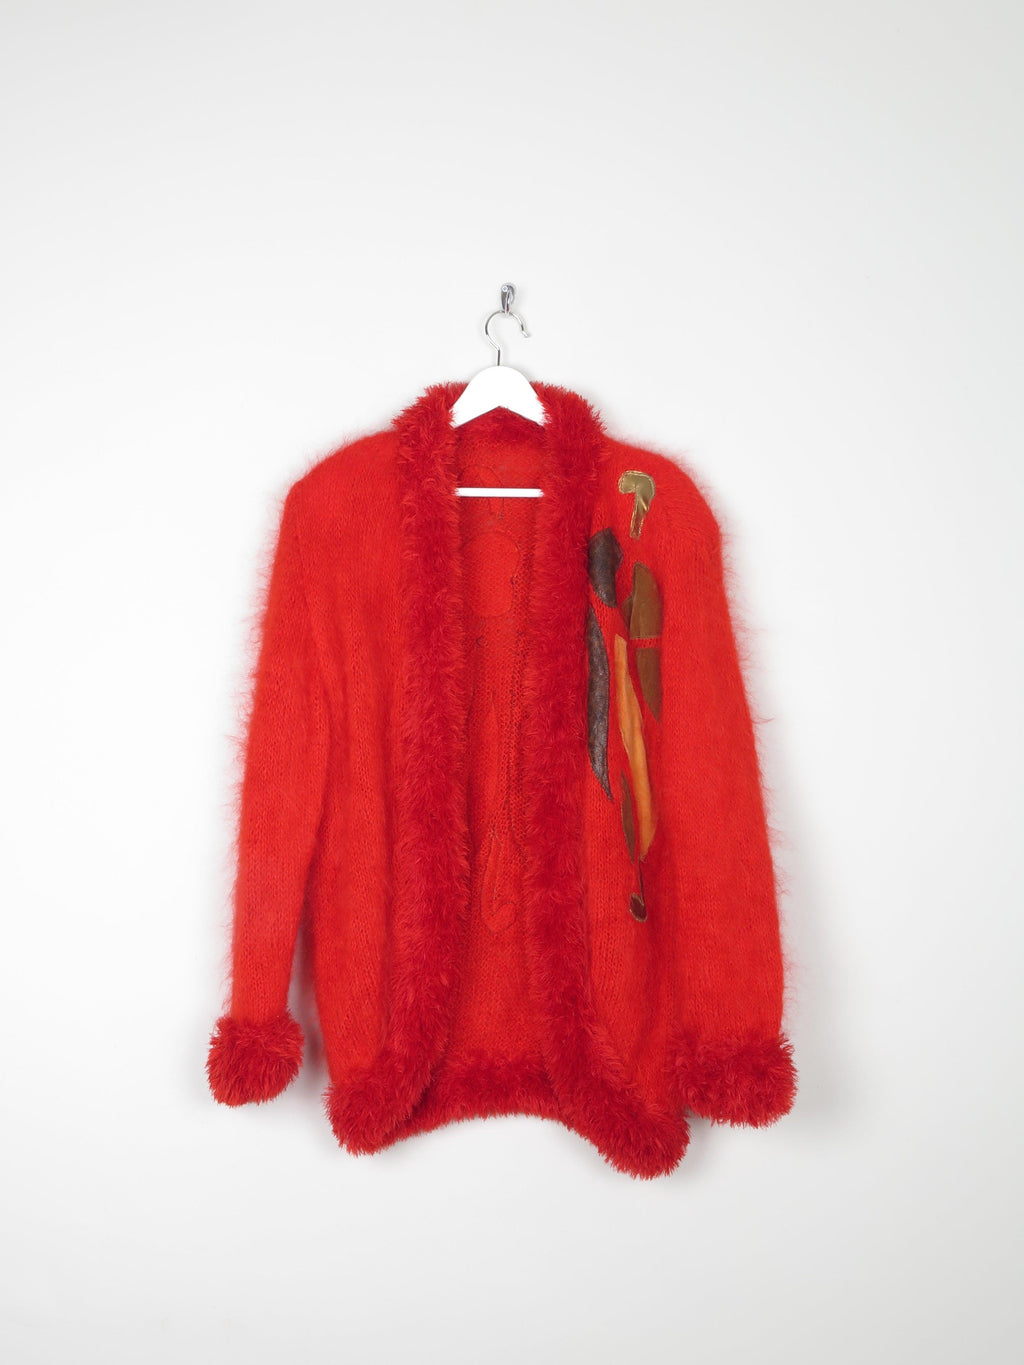 Women's Red Vintage Cardigan with Trim M/L - The Harlequin